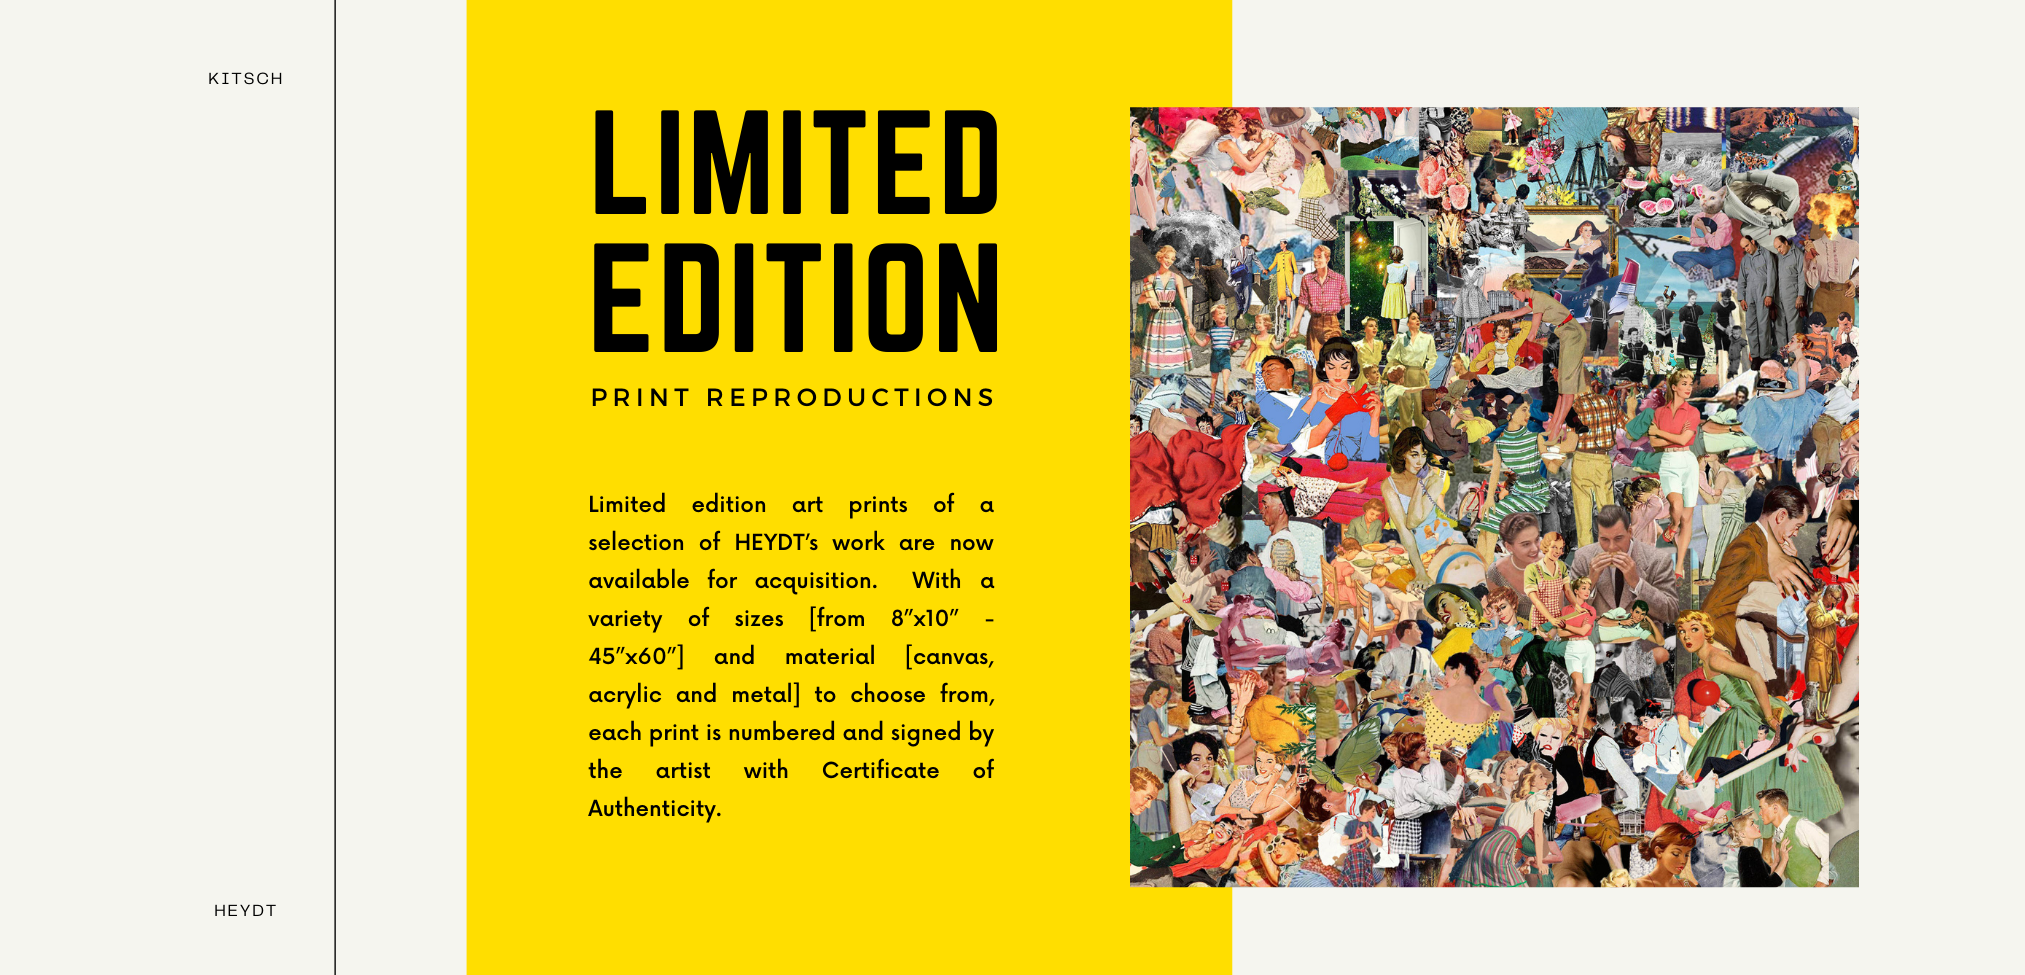 limited edition prints-KITSCH-HEYDT39.png